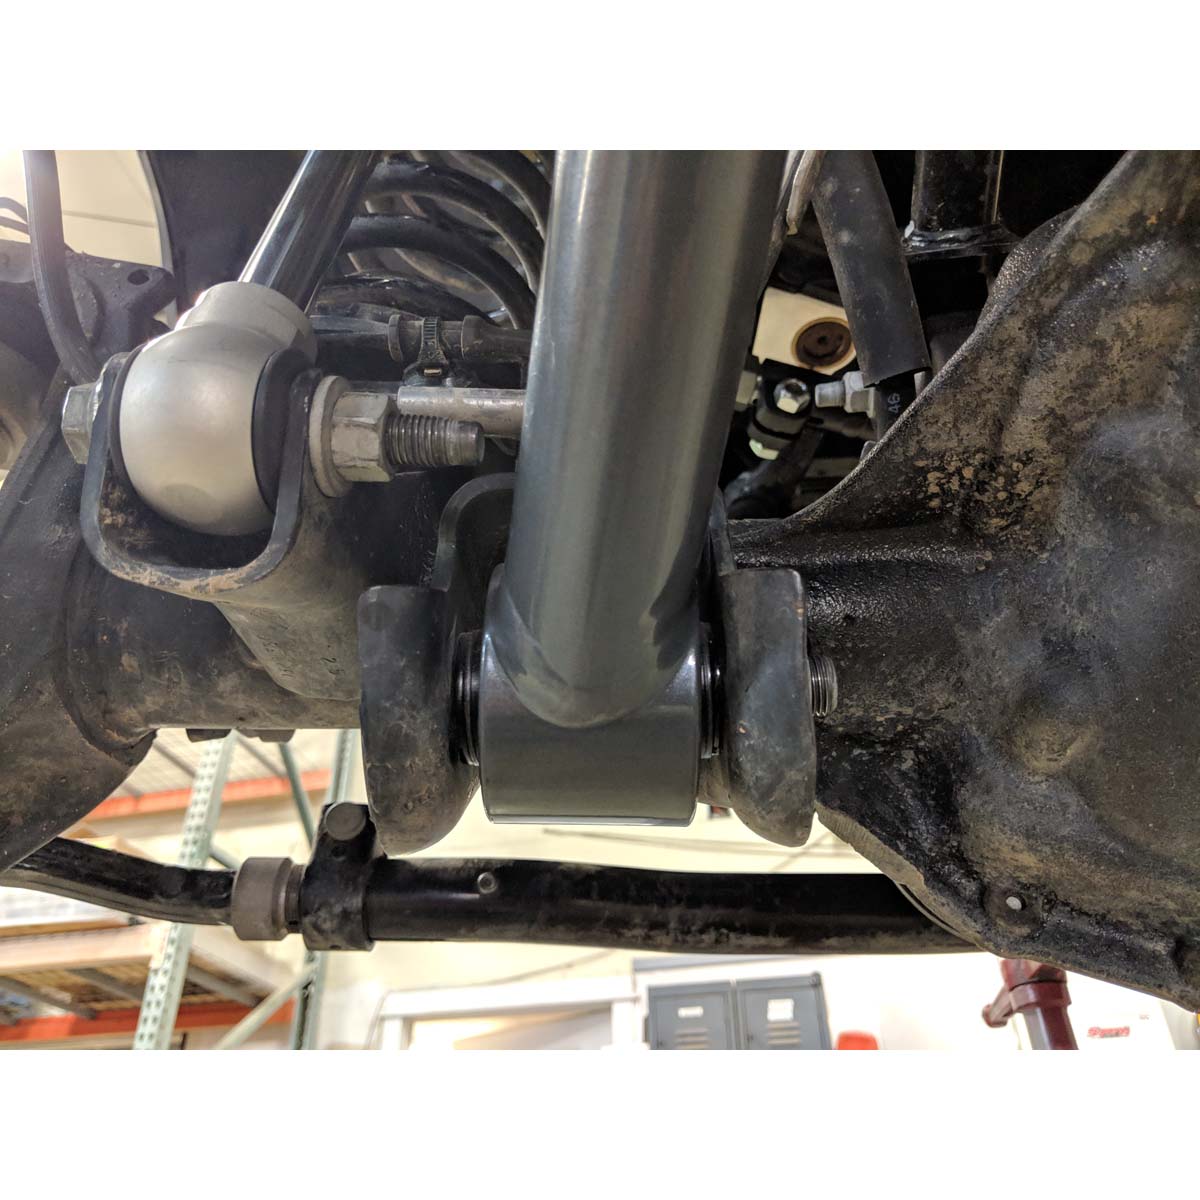 Synergy Jeep JL / JLU / JT Adjustable Front Lower Control Arms